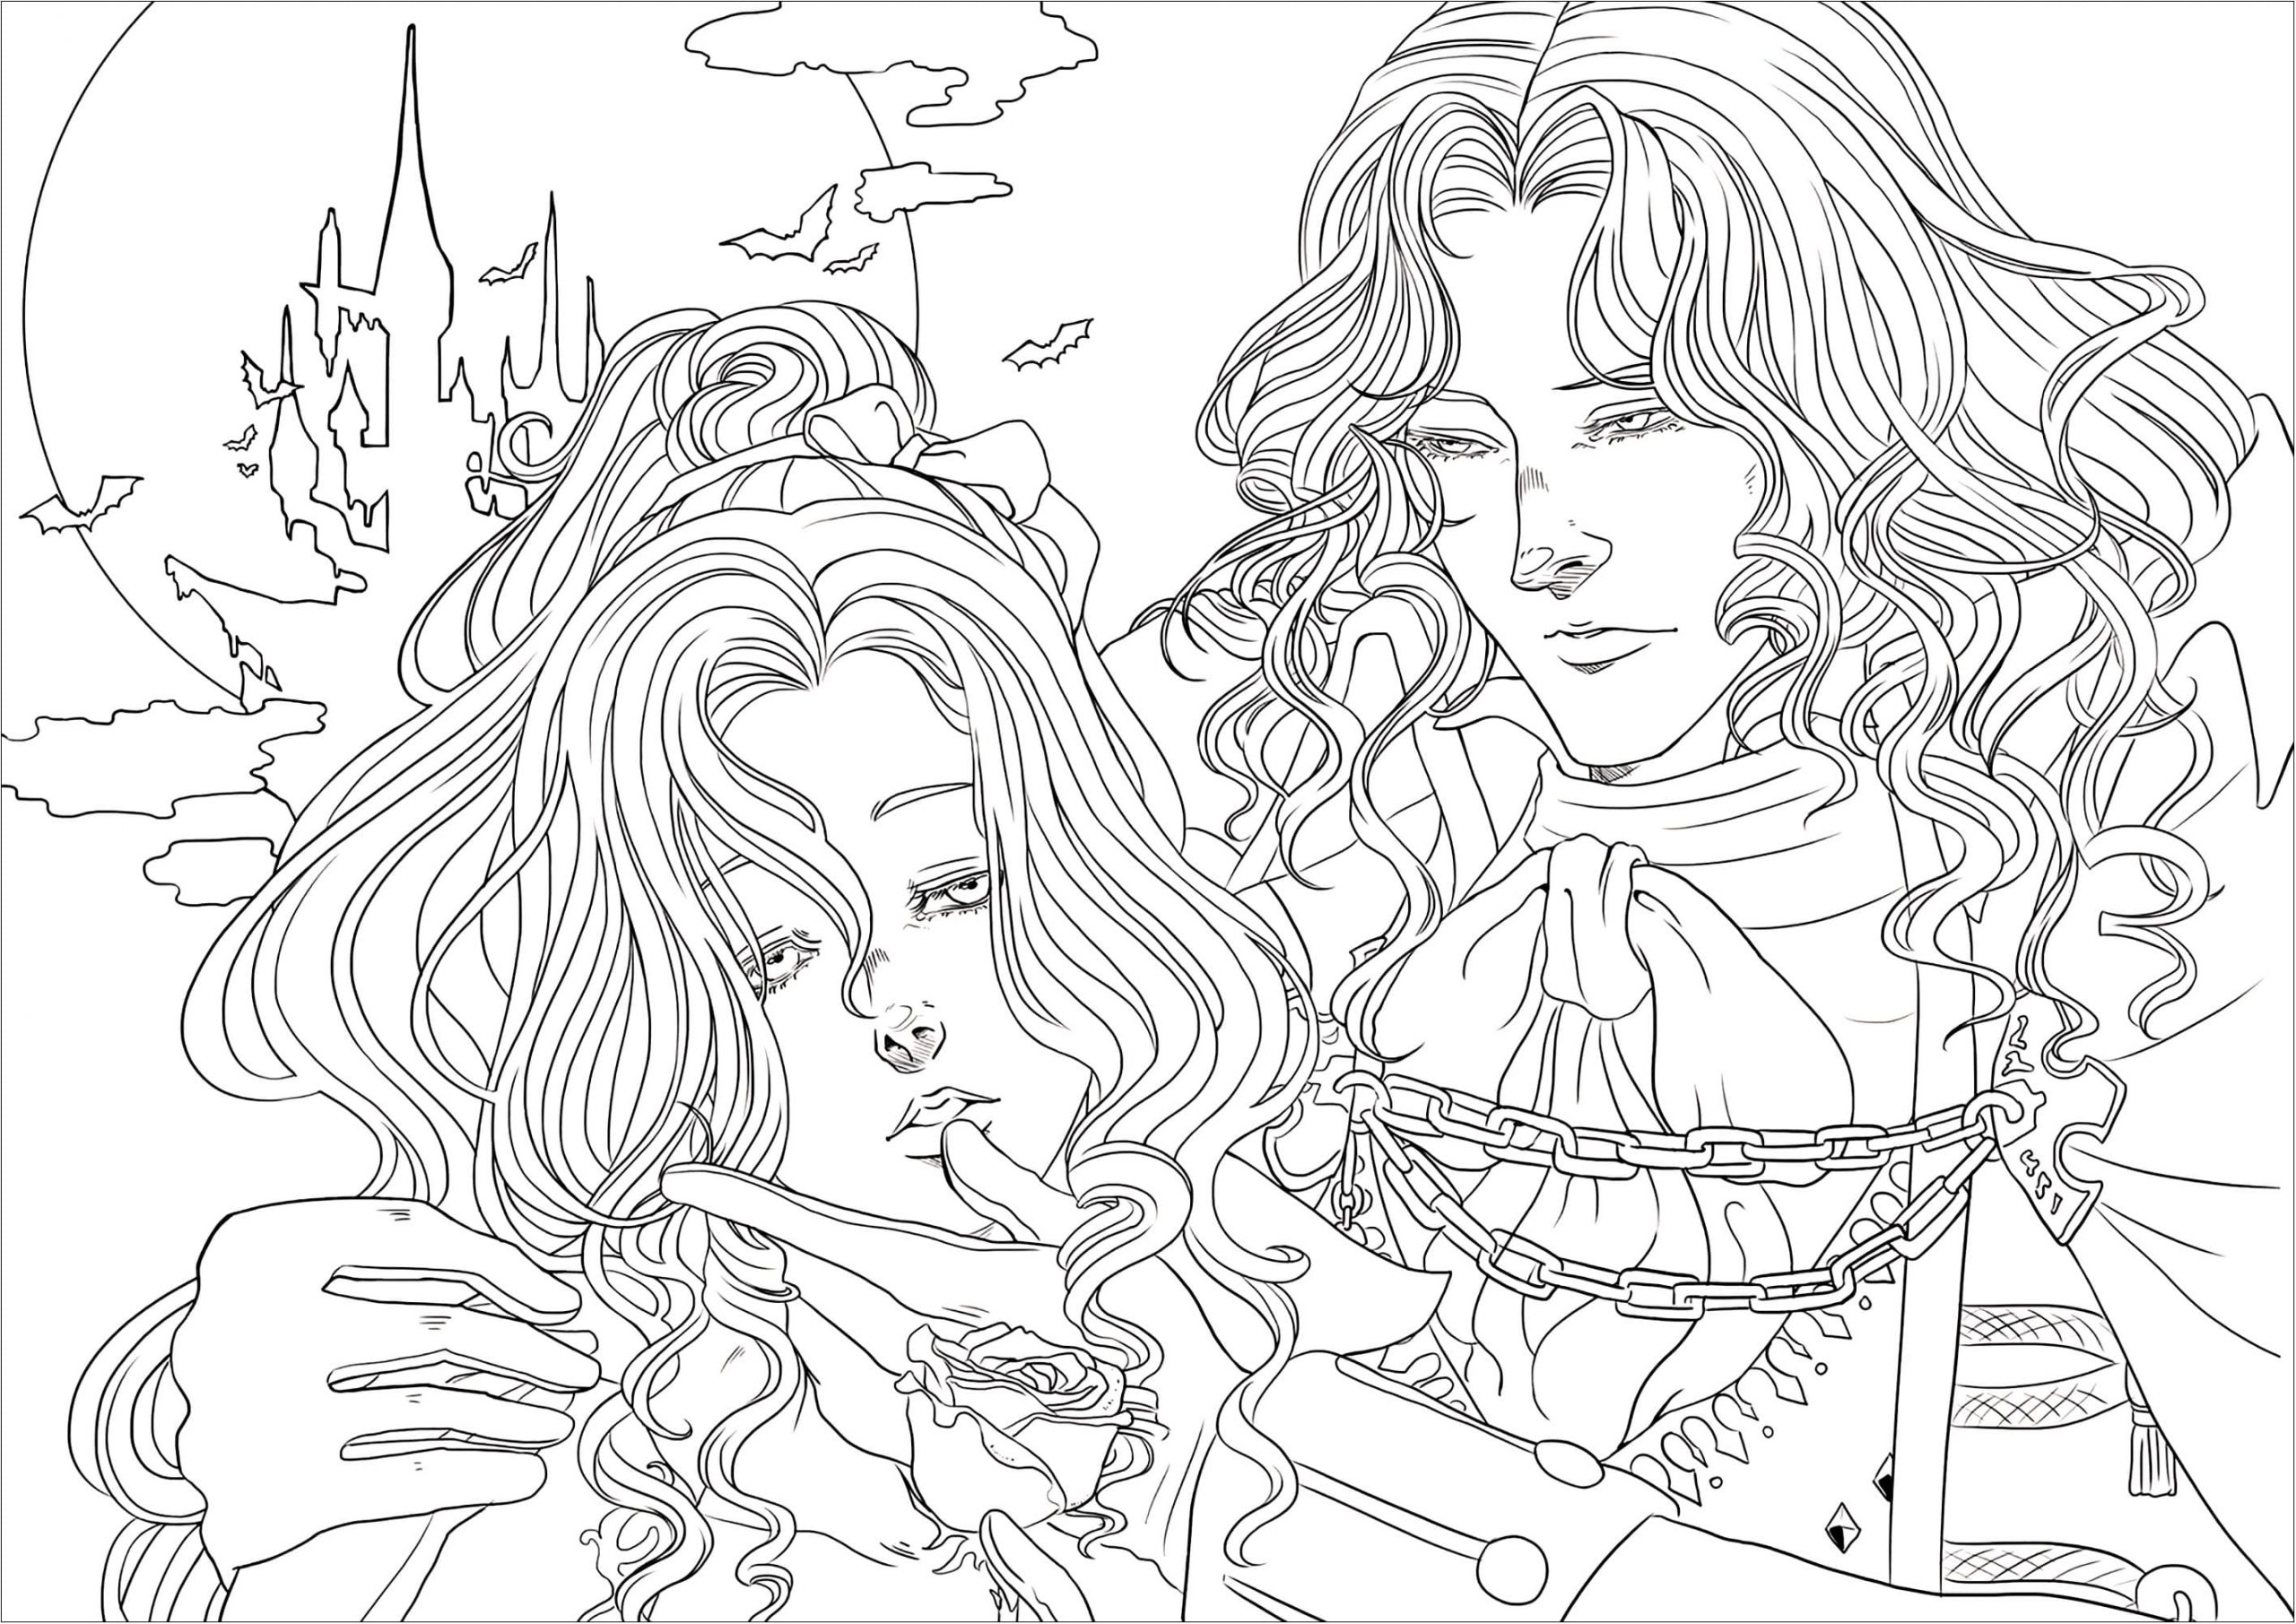 Alucard And Maria Coloring Page